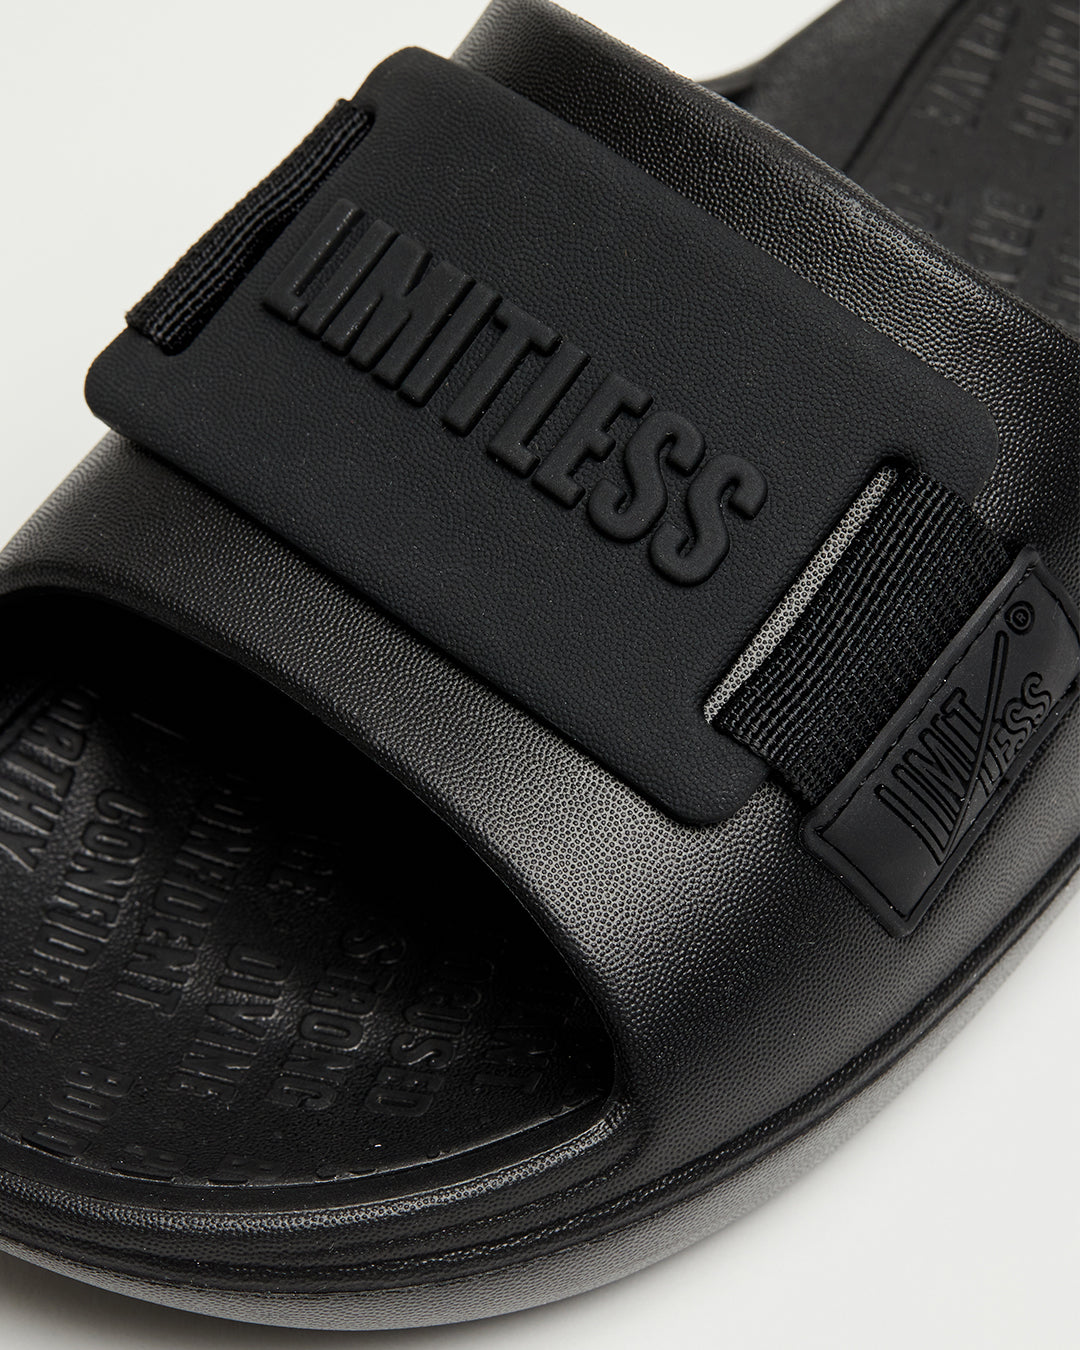 LIMITLESS SLIDES™ WITH ESSENTIAL TIBAH™ QUAD - DOWNTOWN DORAL CHARTER EDITION